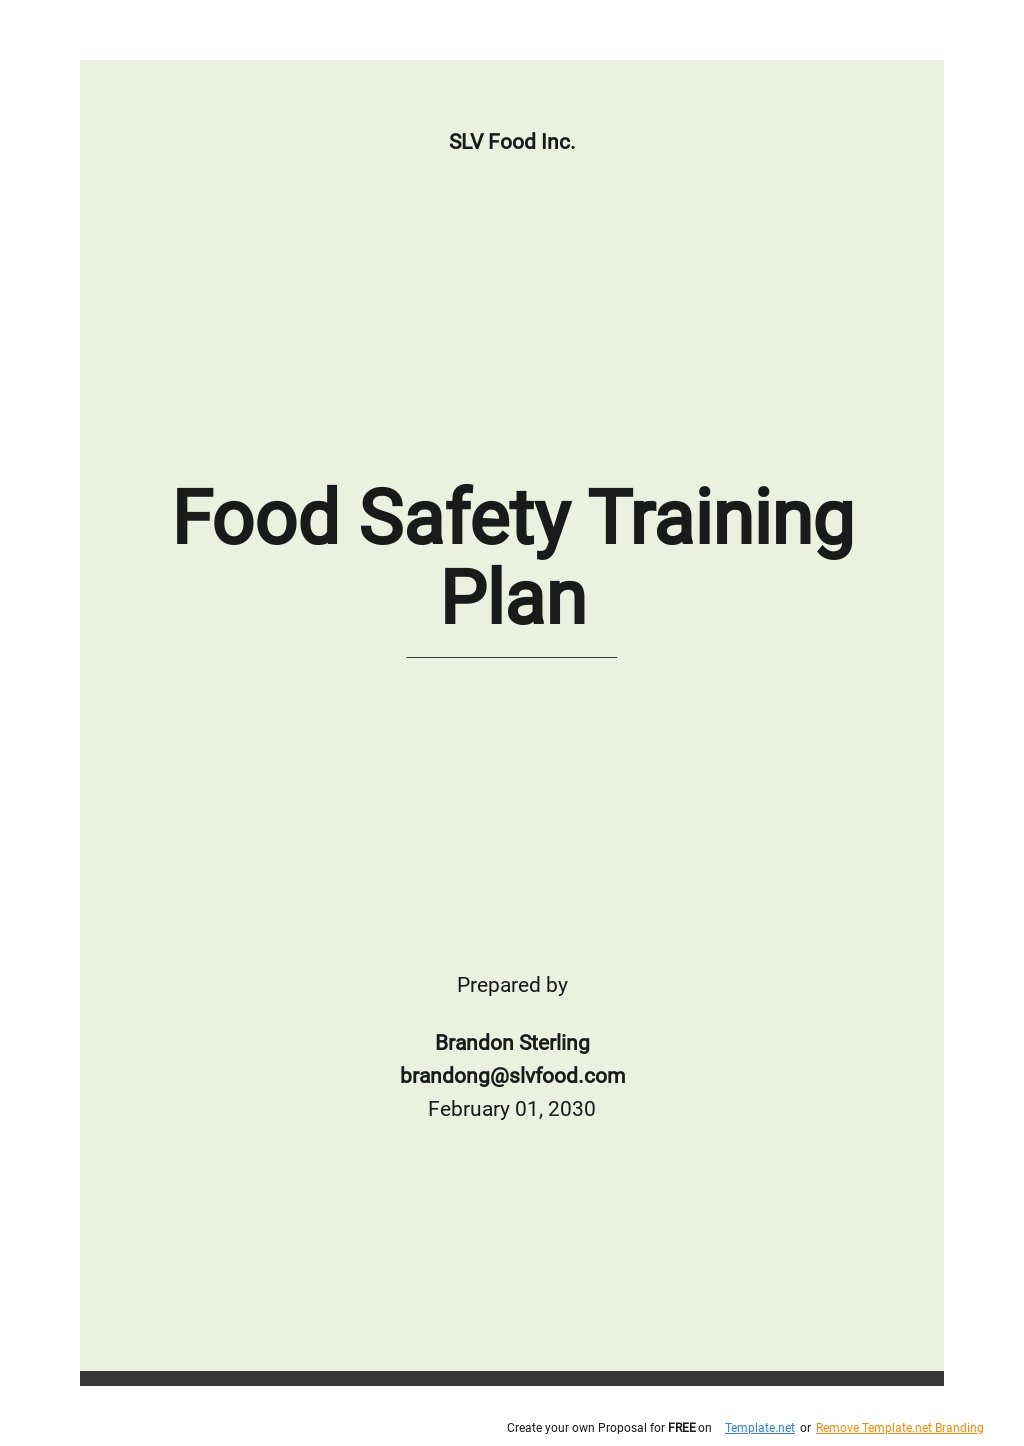 Food Safety Training Plan Template The BestWebsite